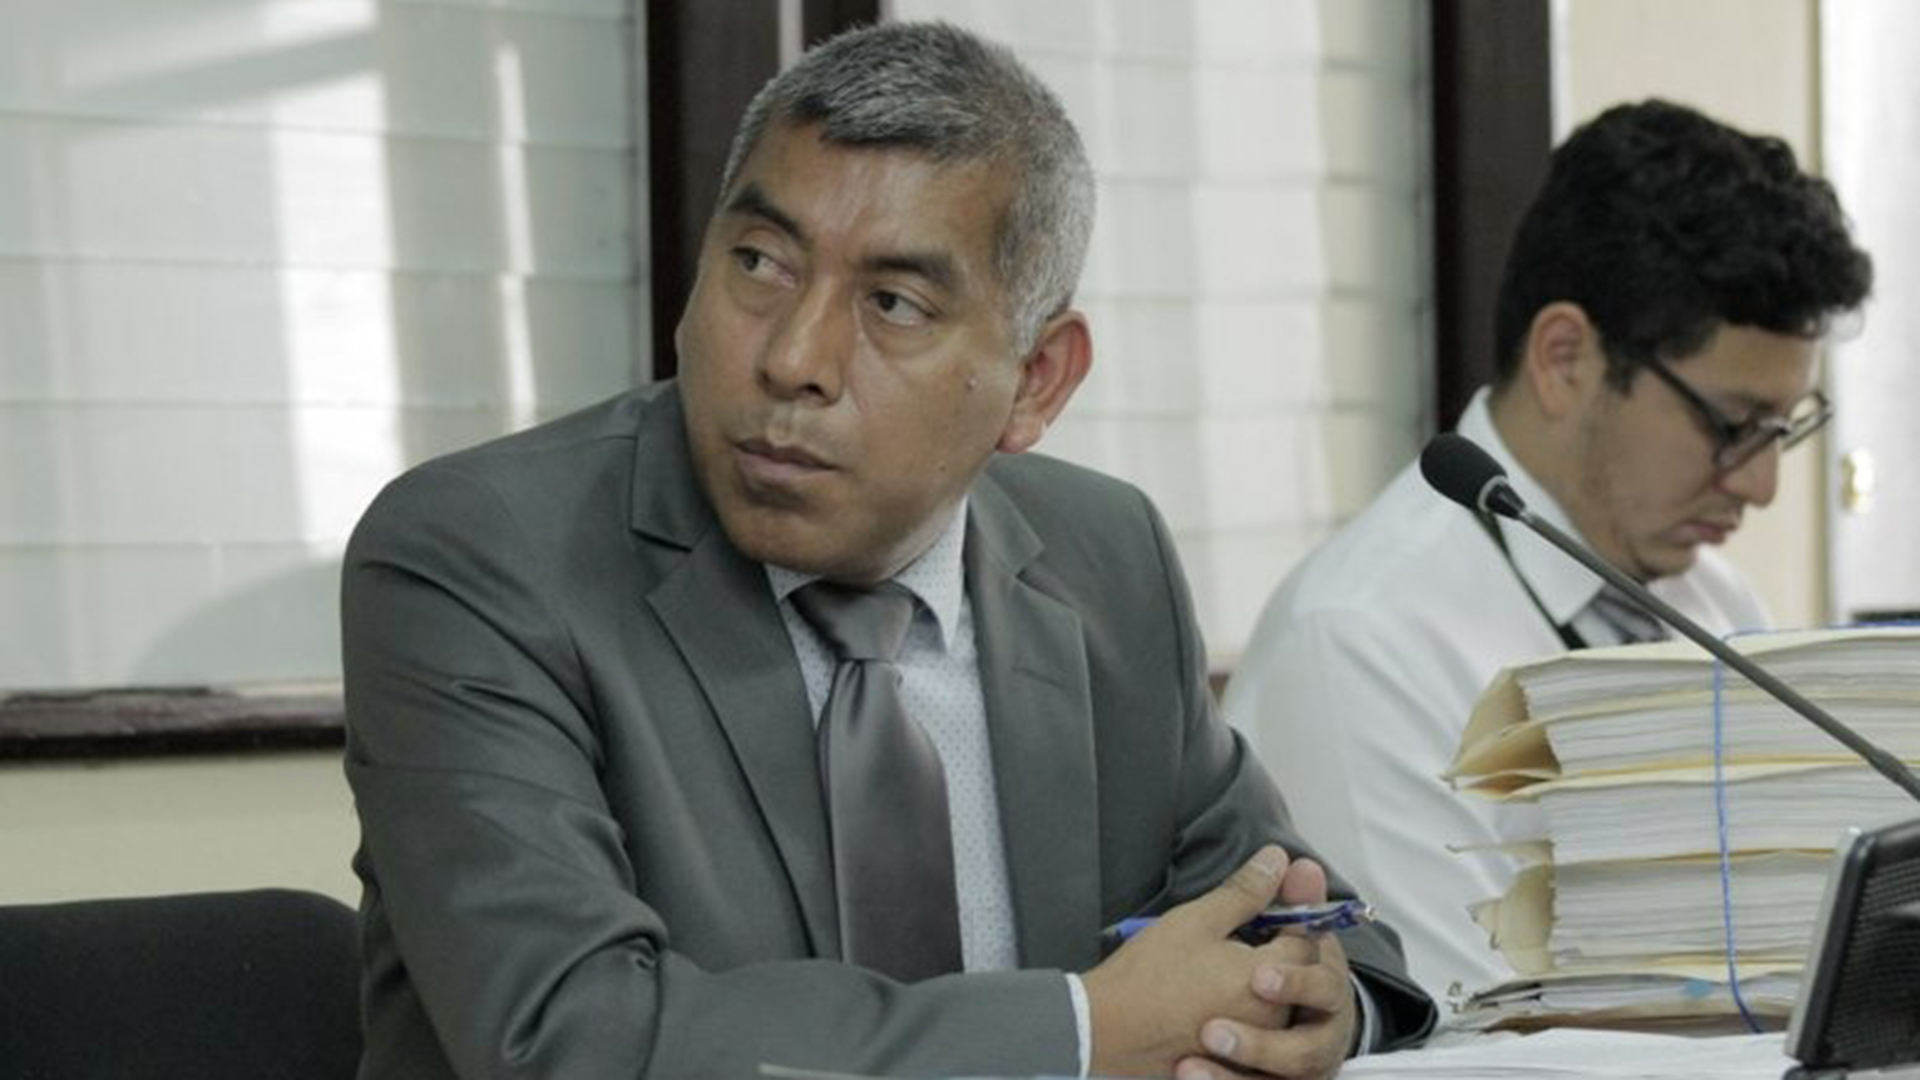 Curruchiche, head of the Special Prosecutor's Office Against Impunity (FECI), indicated that Zamora and others involved 